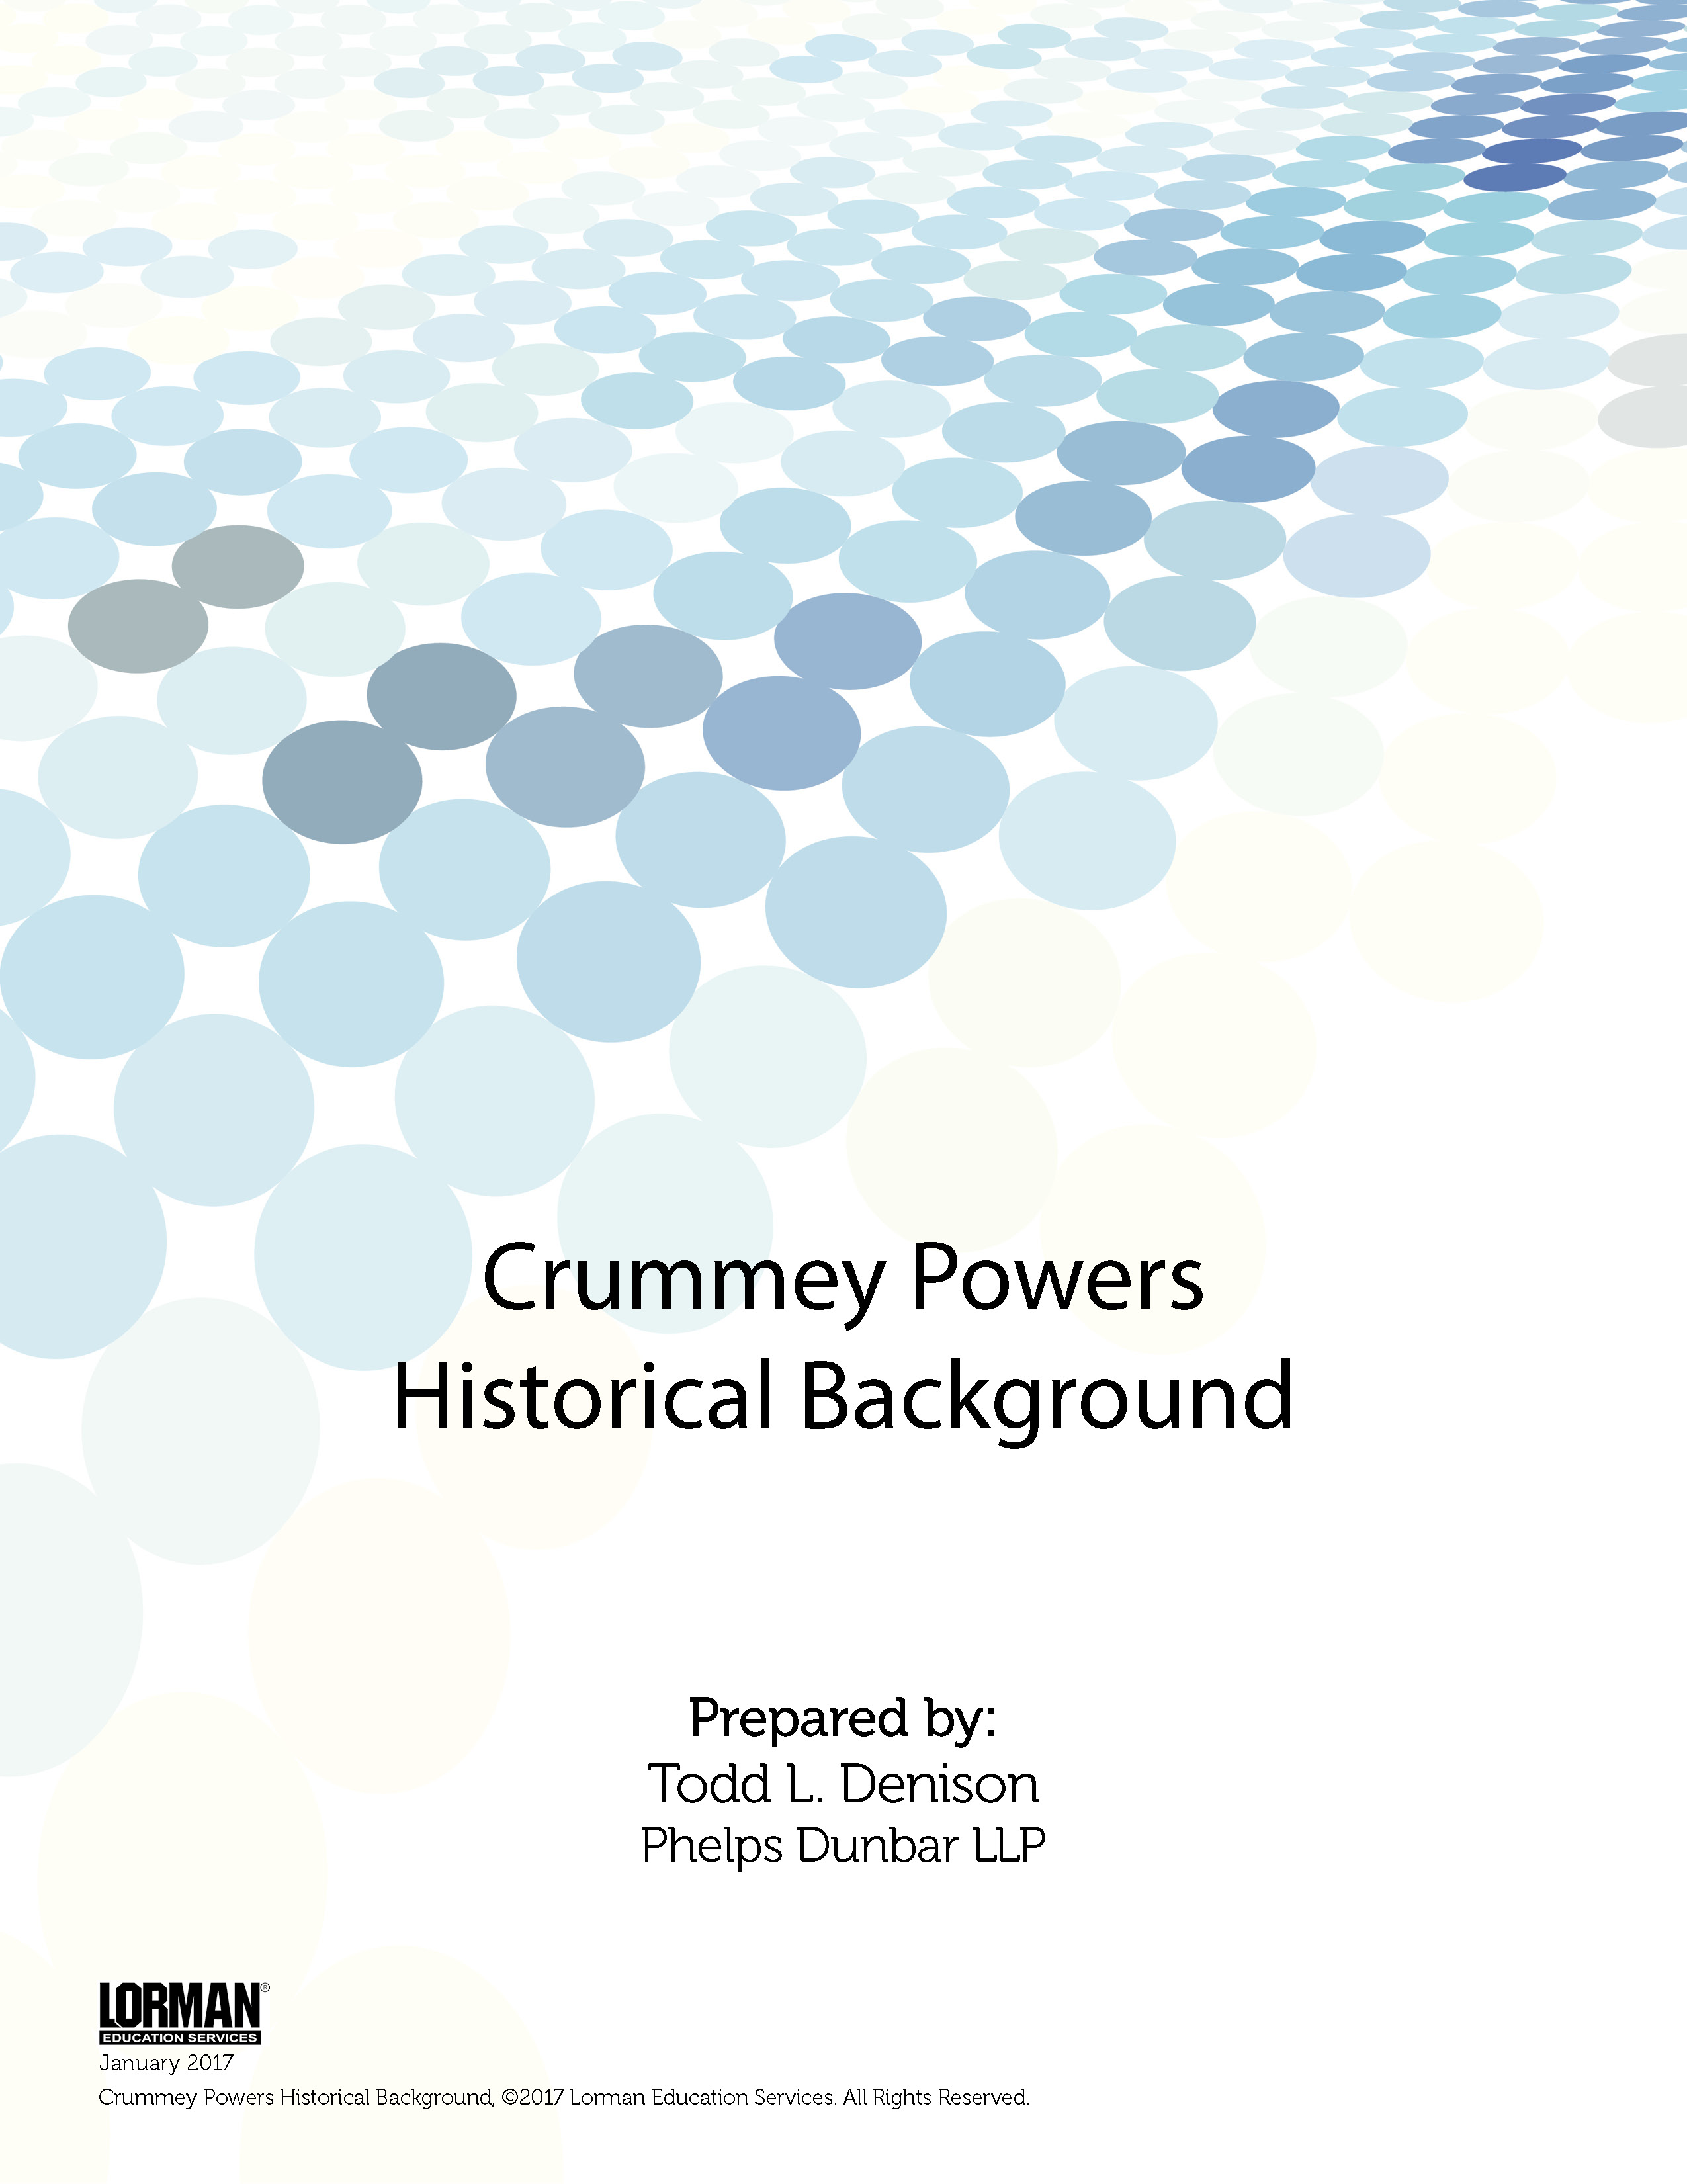 Crummey Powers Historical Background